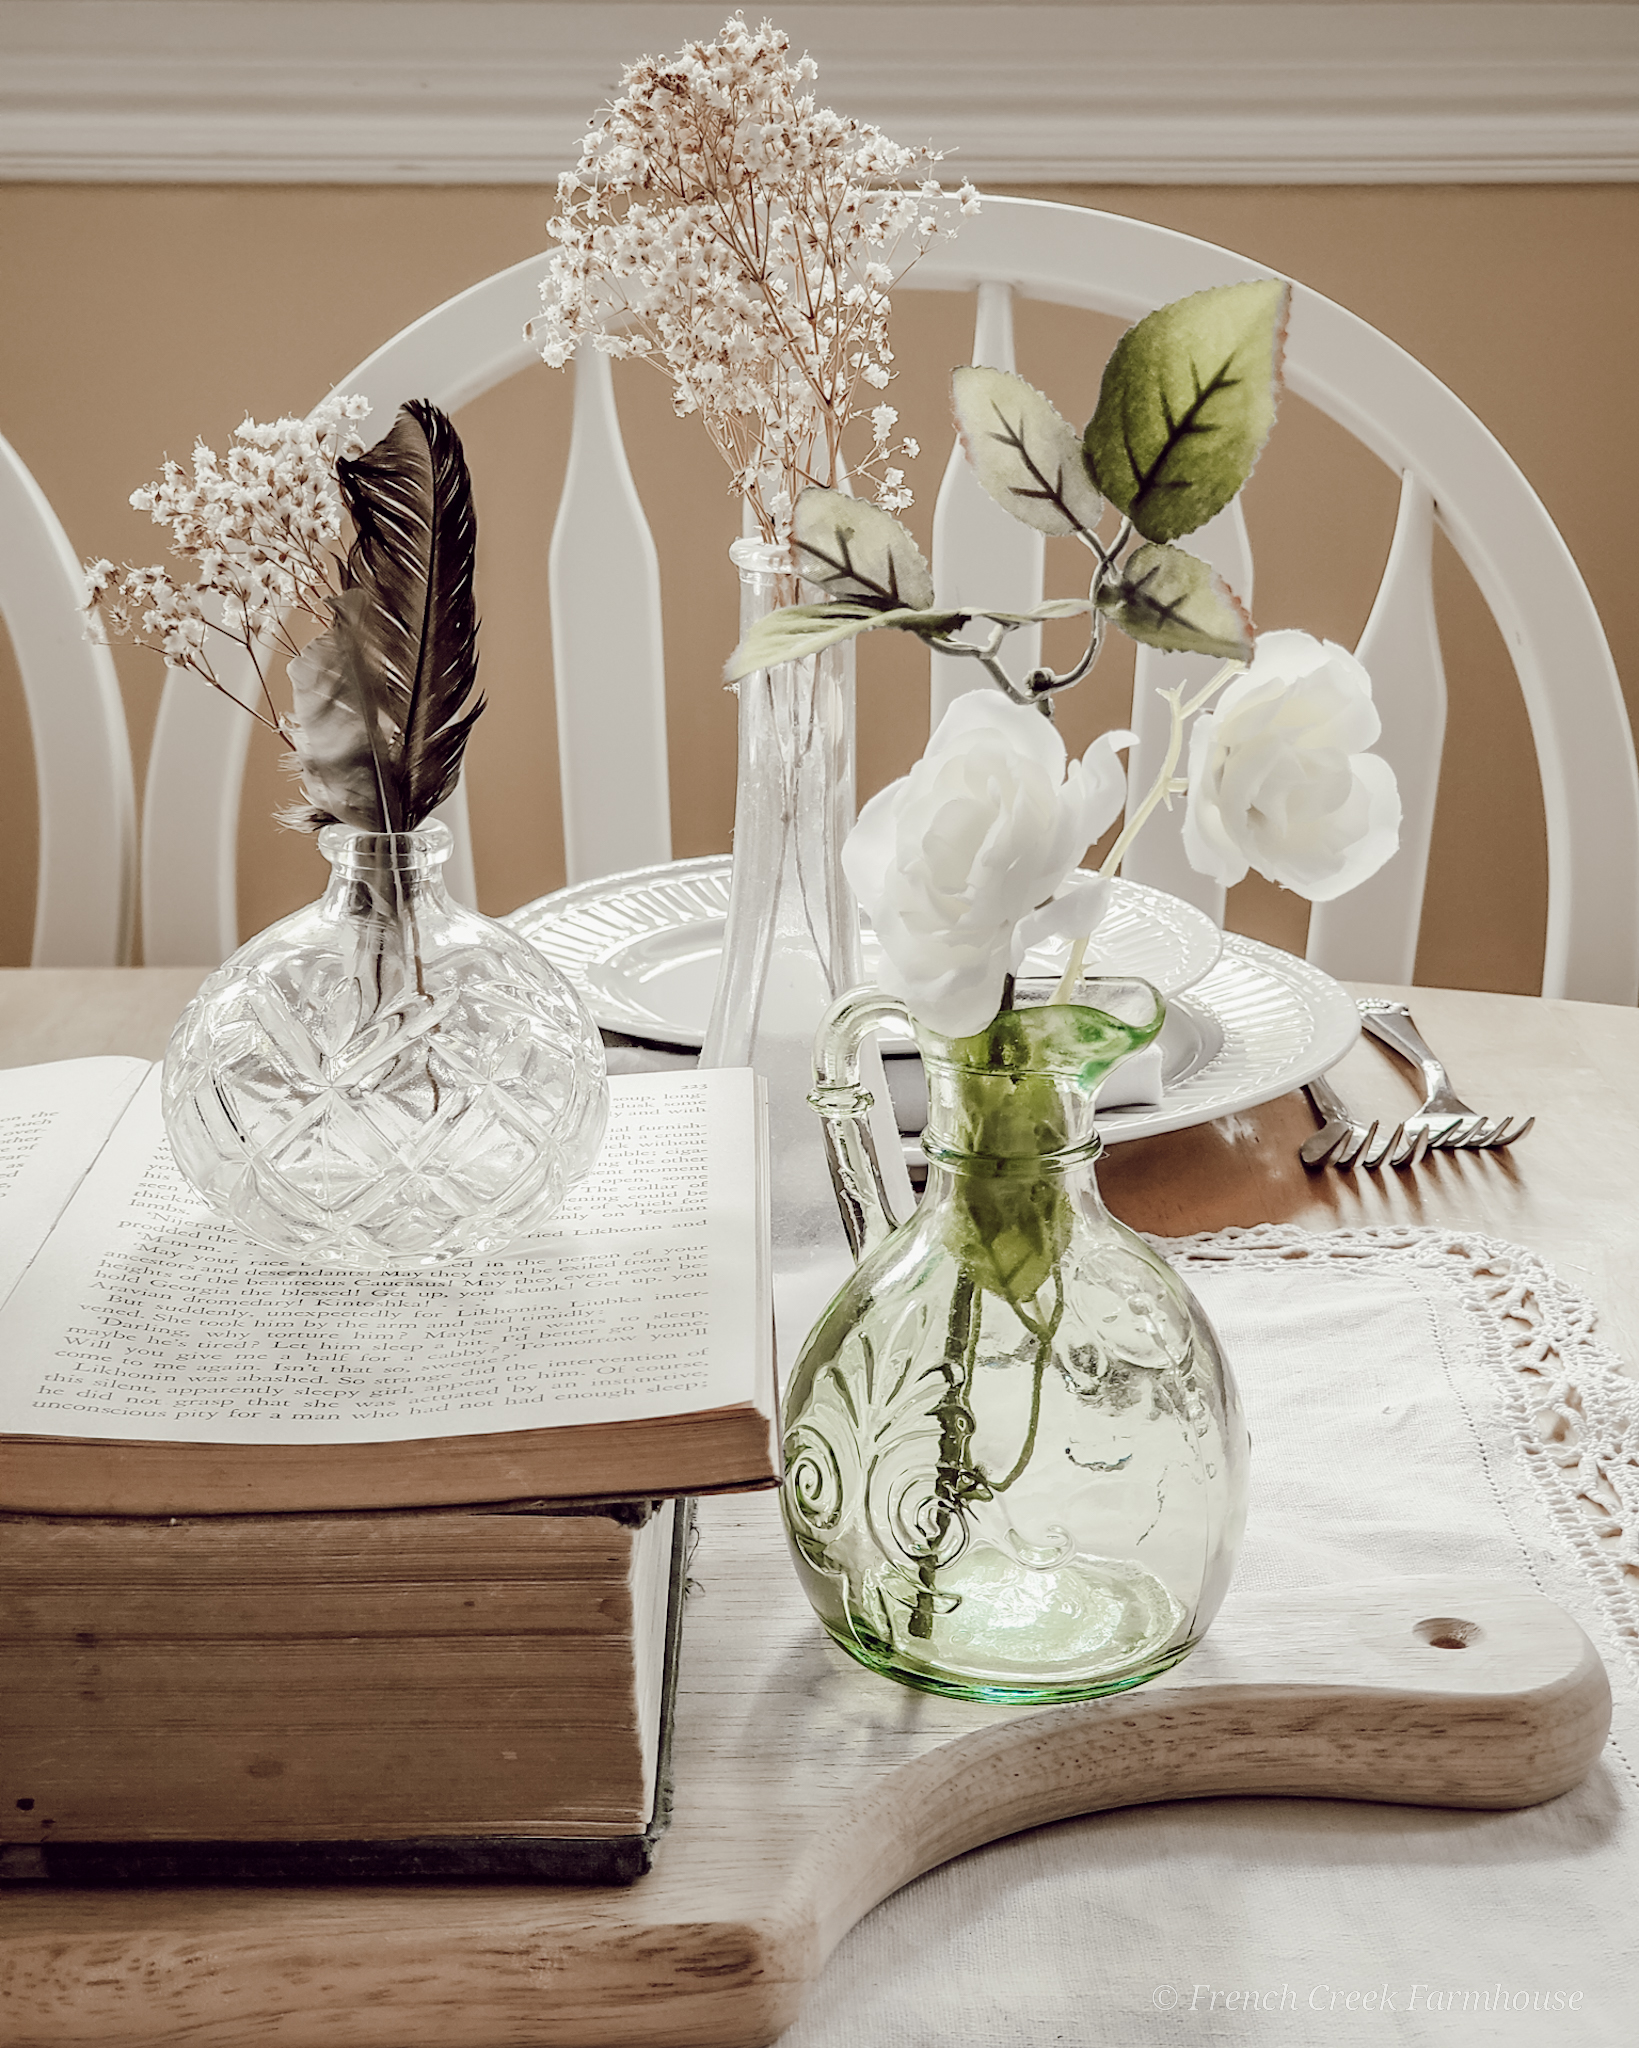 Small vintage glass vases filled with baby's breath as a centerpiece